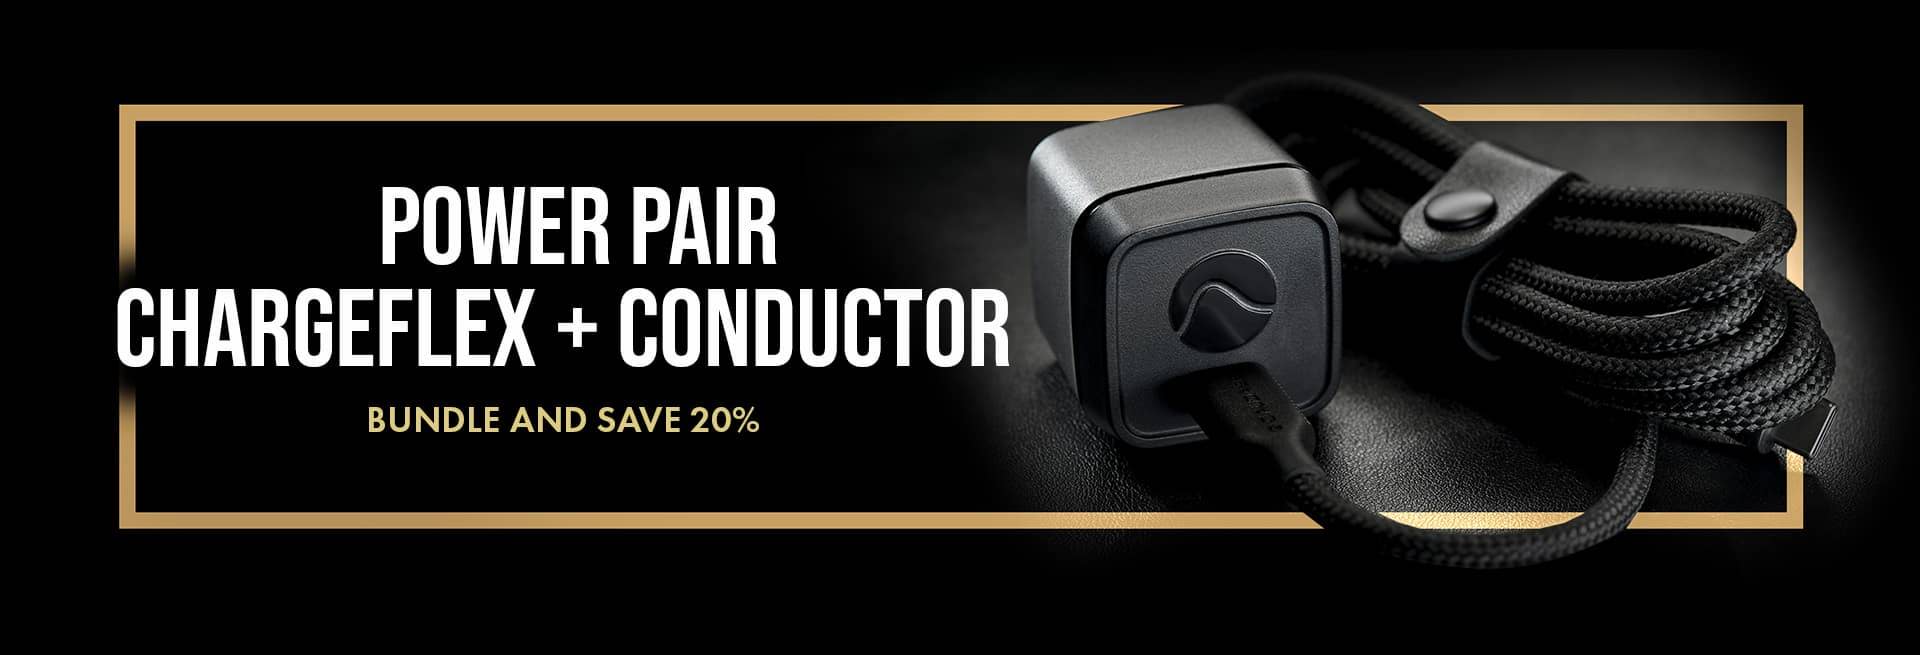 POWER PAIR - CONDUCTOR + CHARGEFLEX - BUNDLE AND SAVE 20%